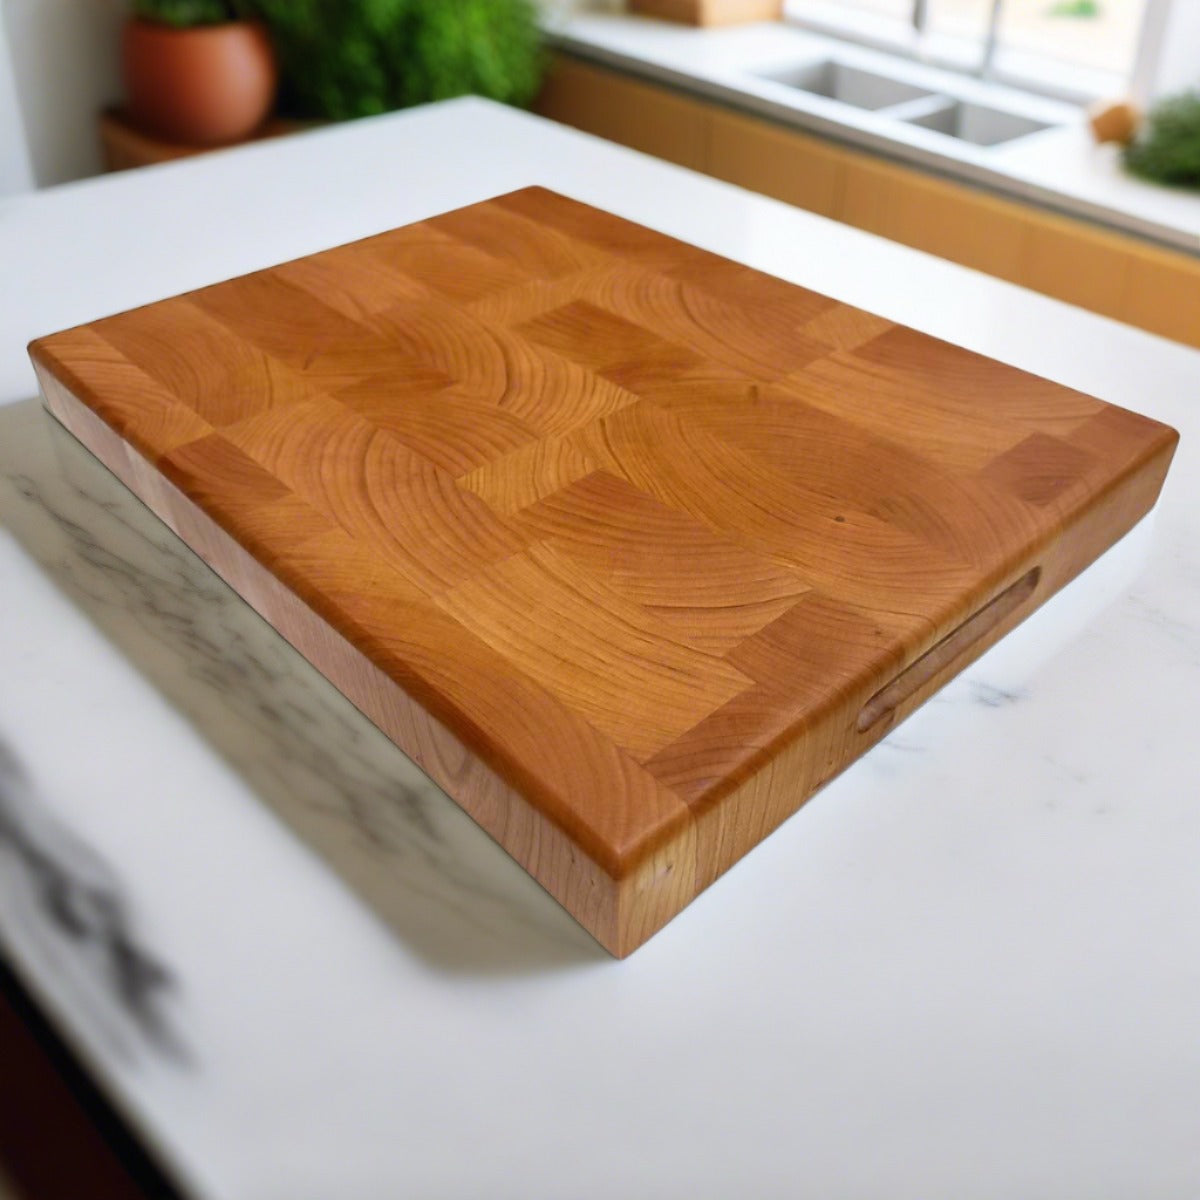 Cherry End Grain Chaos Cutting Board "The Price"